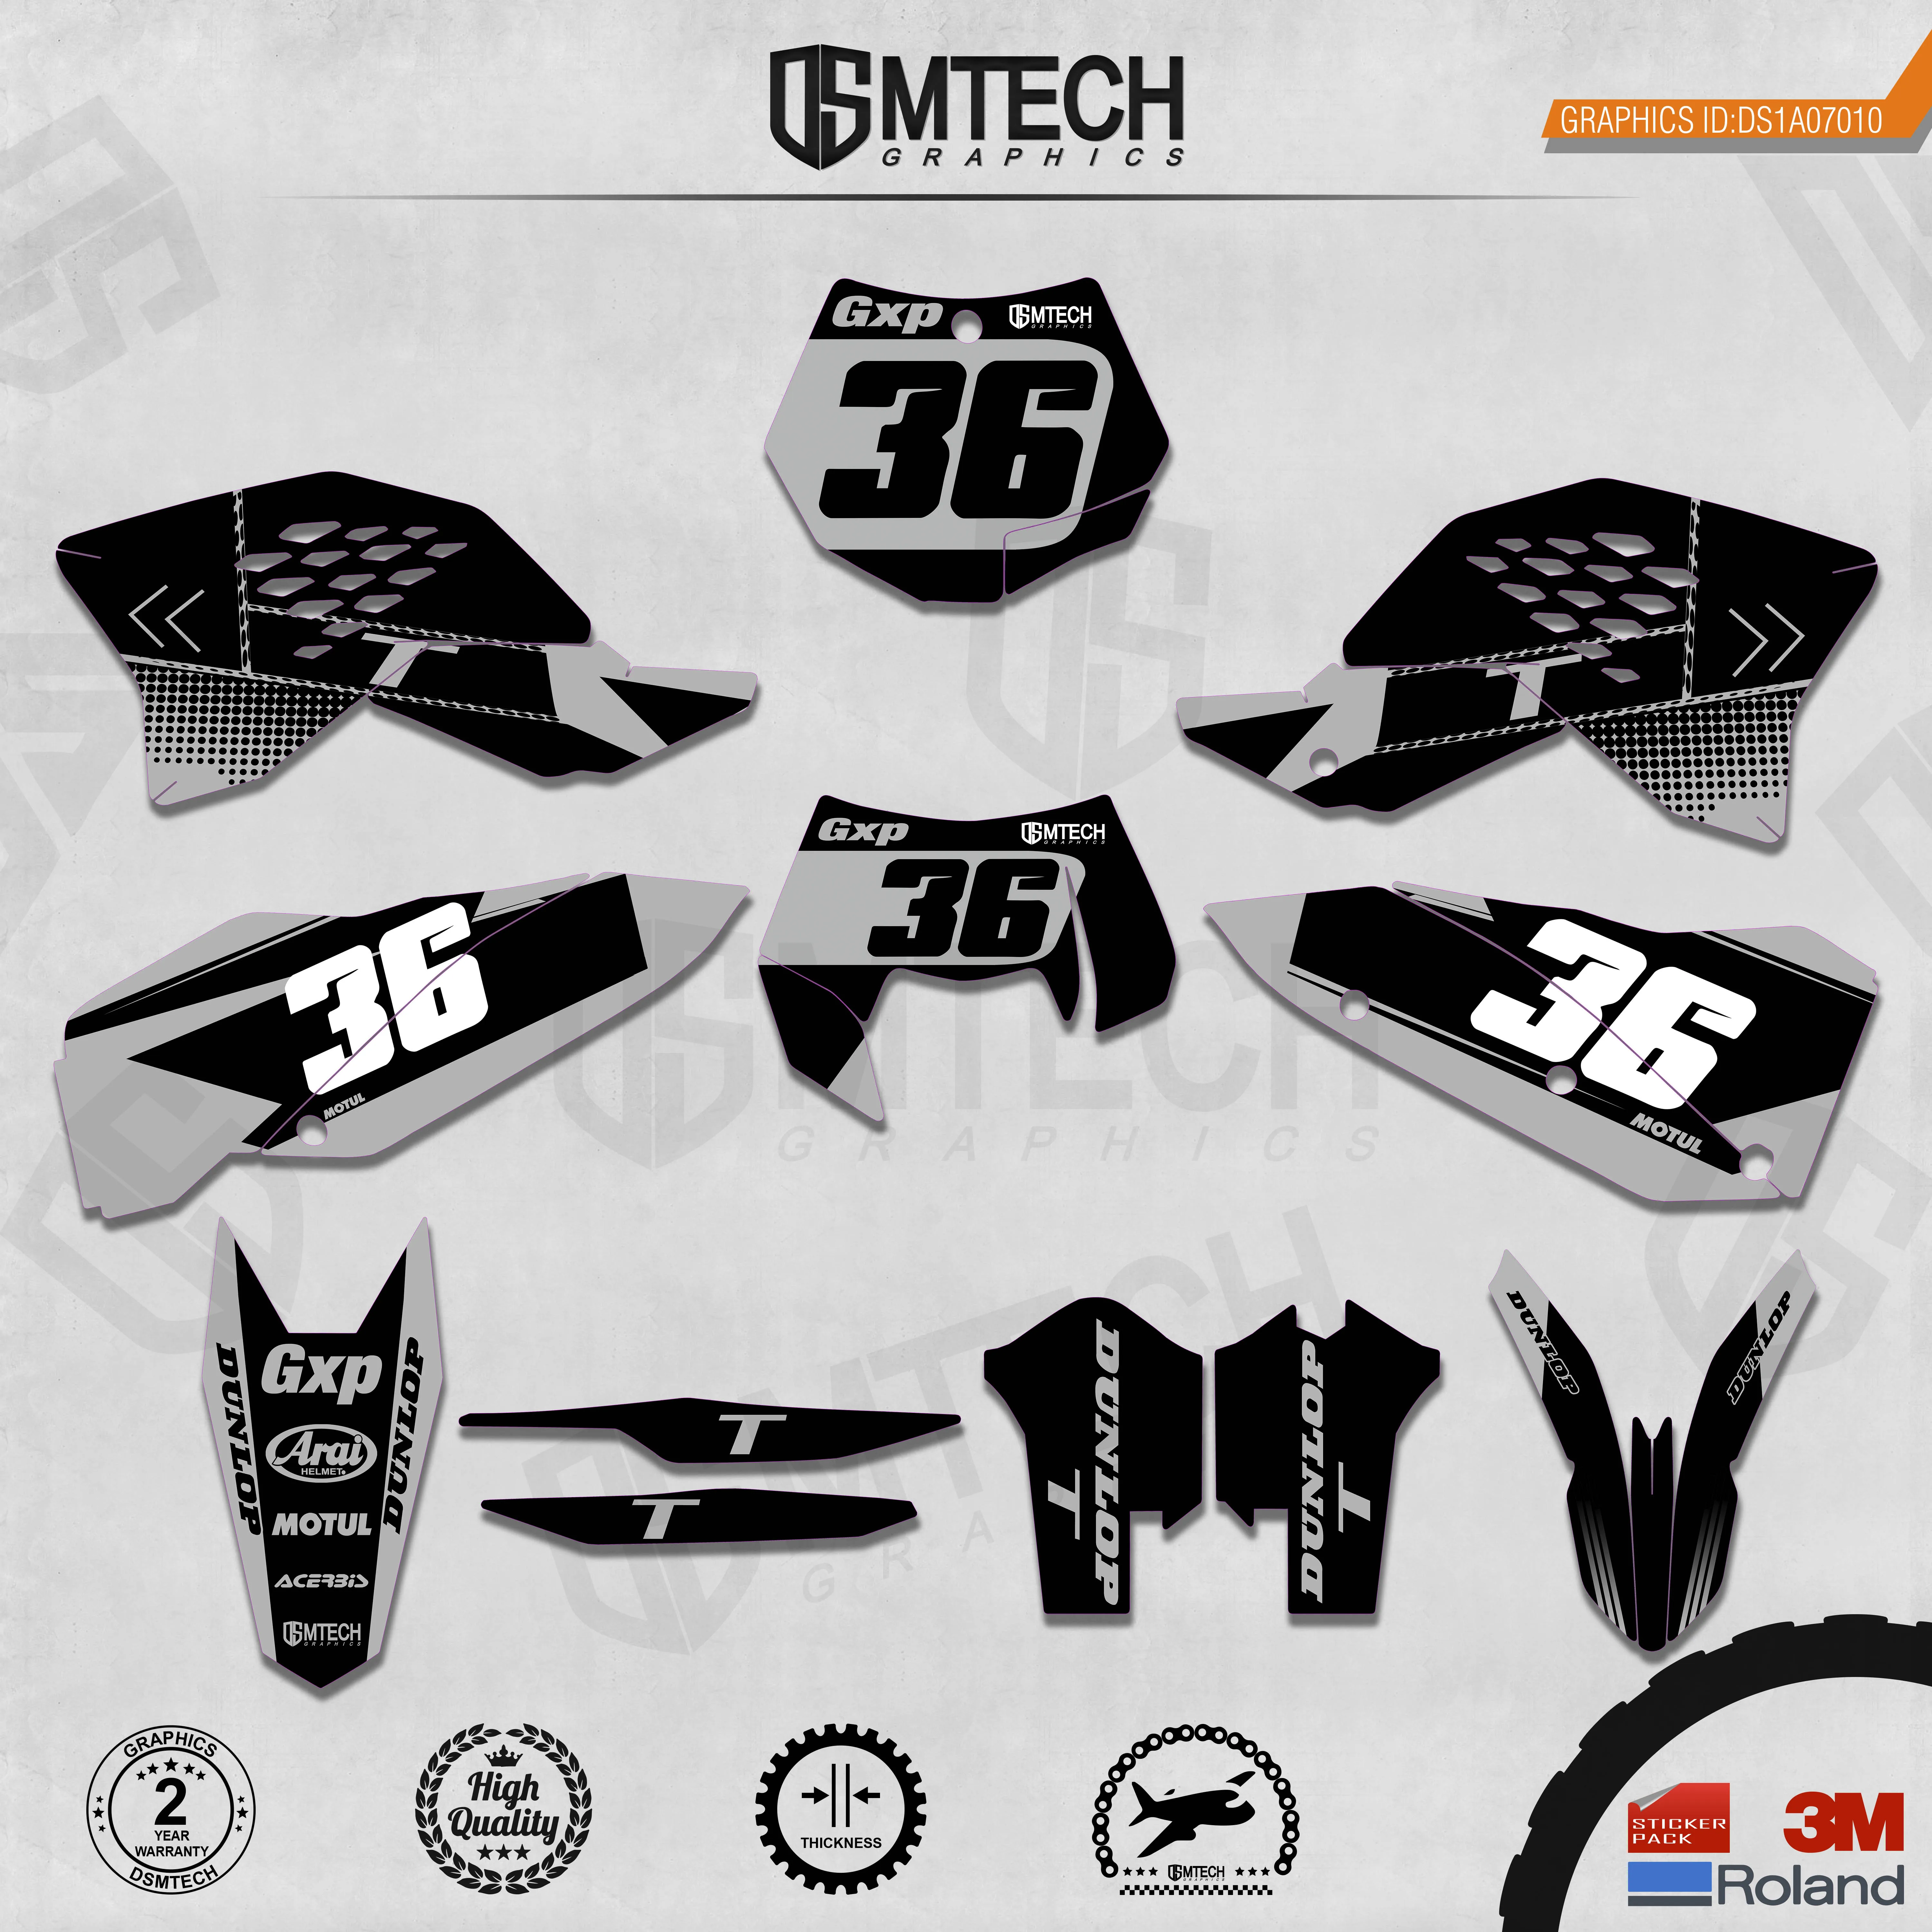 dsmtech-customized-team-graphics-backgrounds-decals-3m-custom-stickers-for-2007-2010-sxf-2008-2011-exc-gxp-010